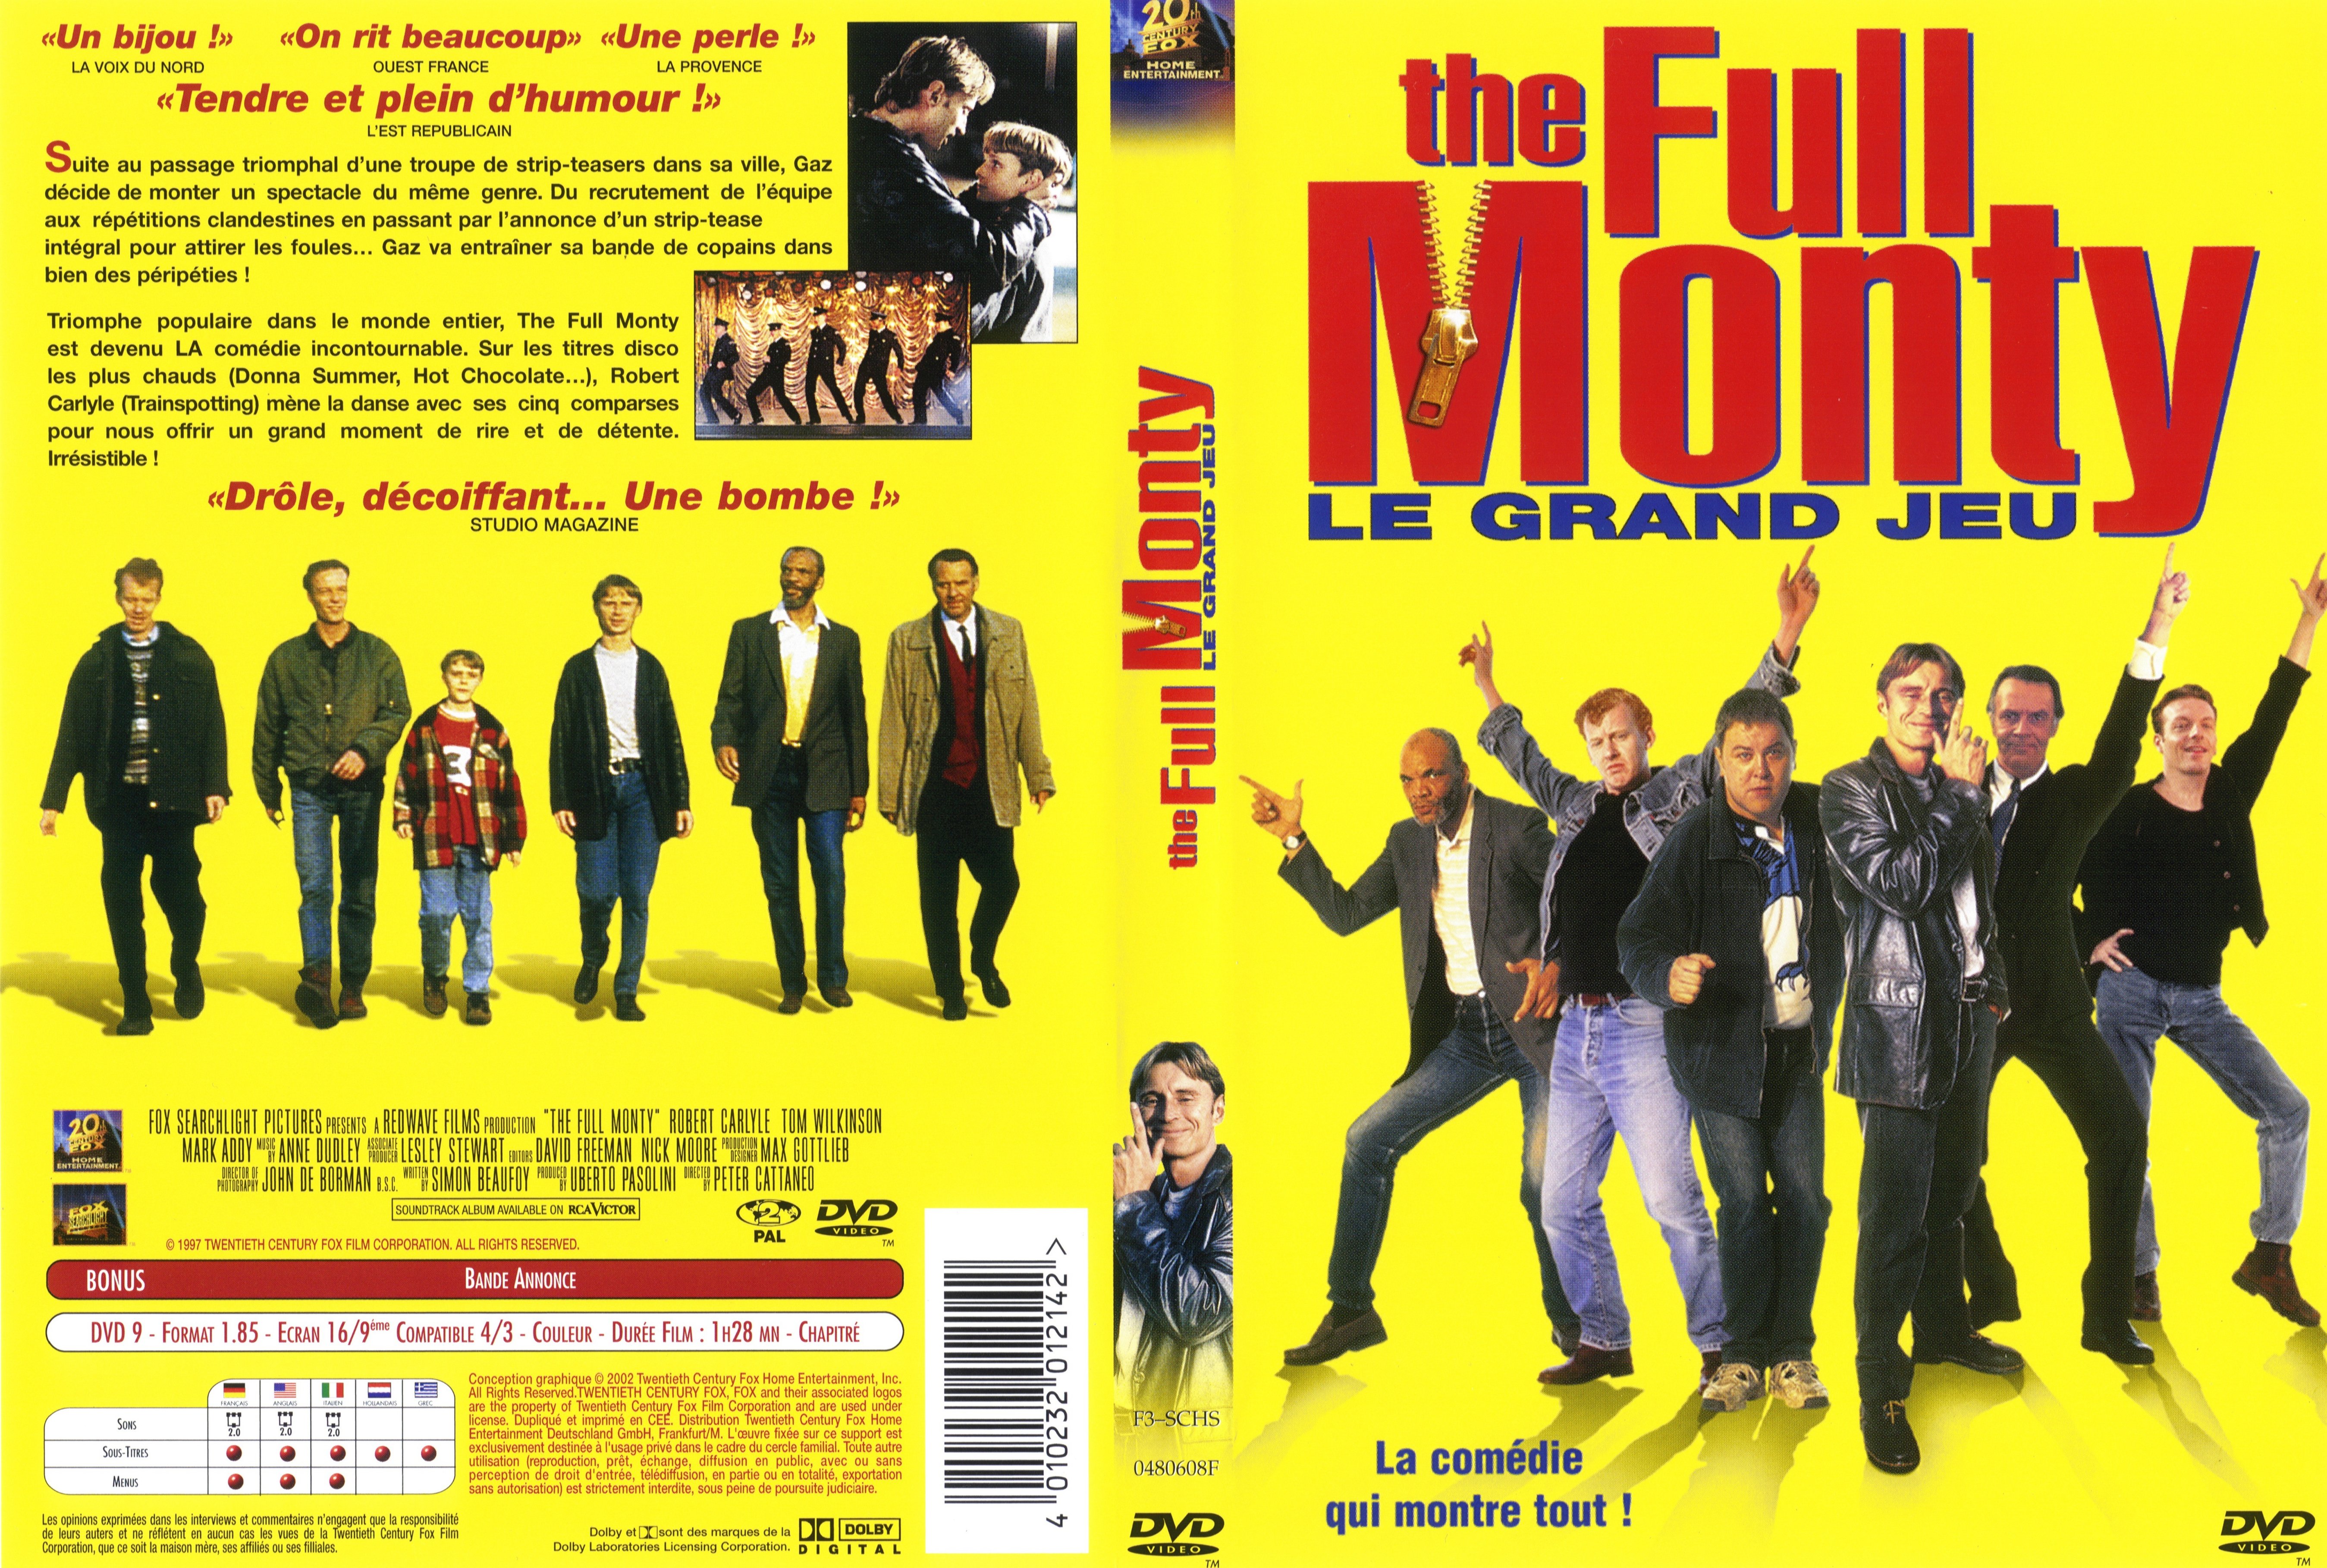 Jaquette DVD The full monty